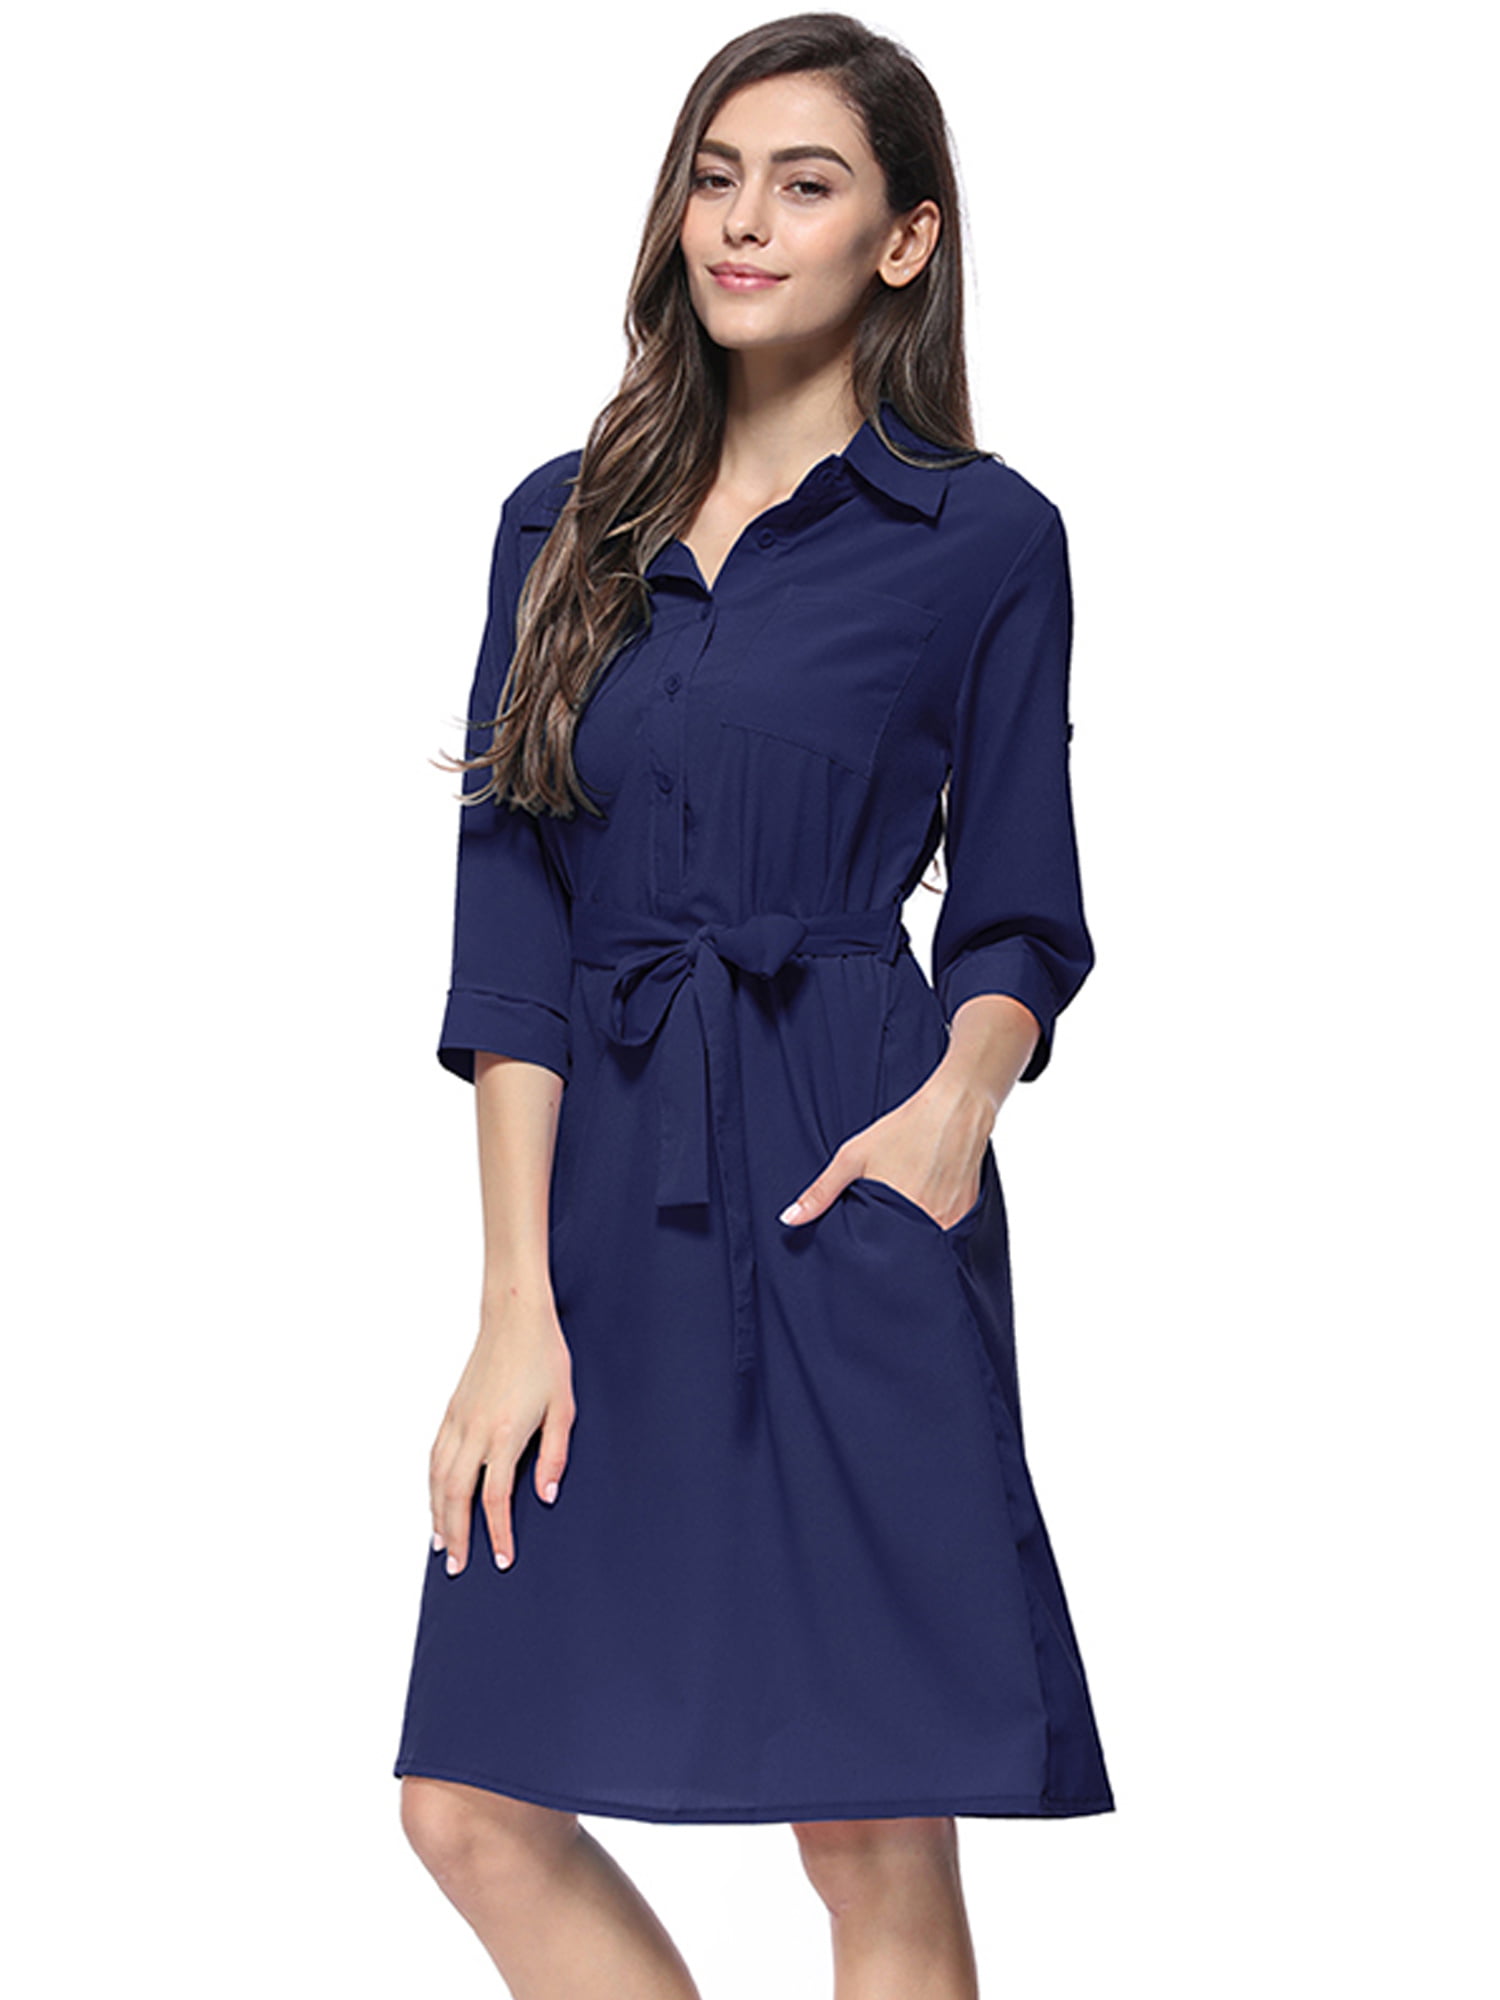 Women Casual 3/4 Sleeve Pocket Midi Collared Belted Shirt Dress Long ...